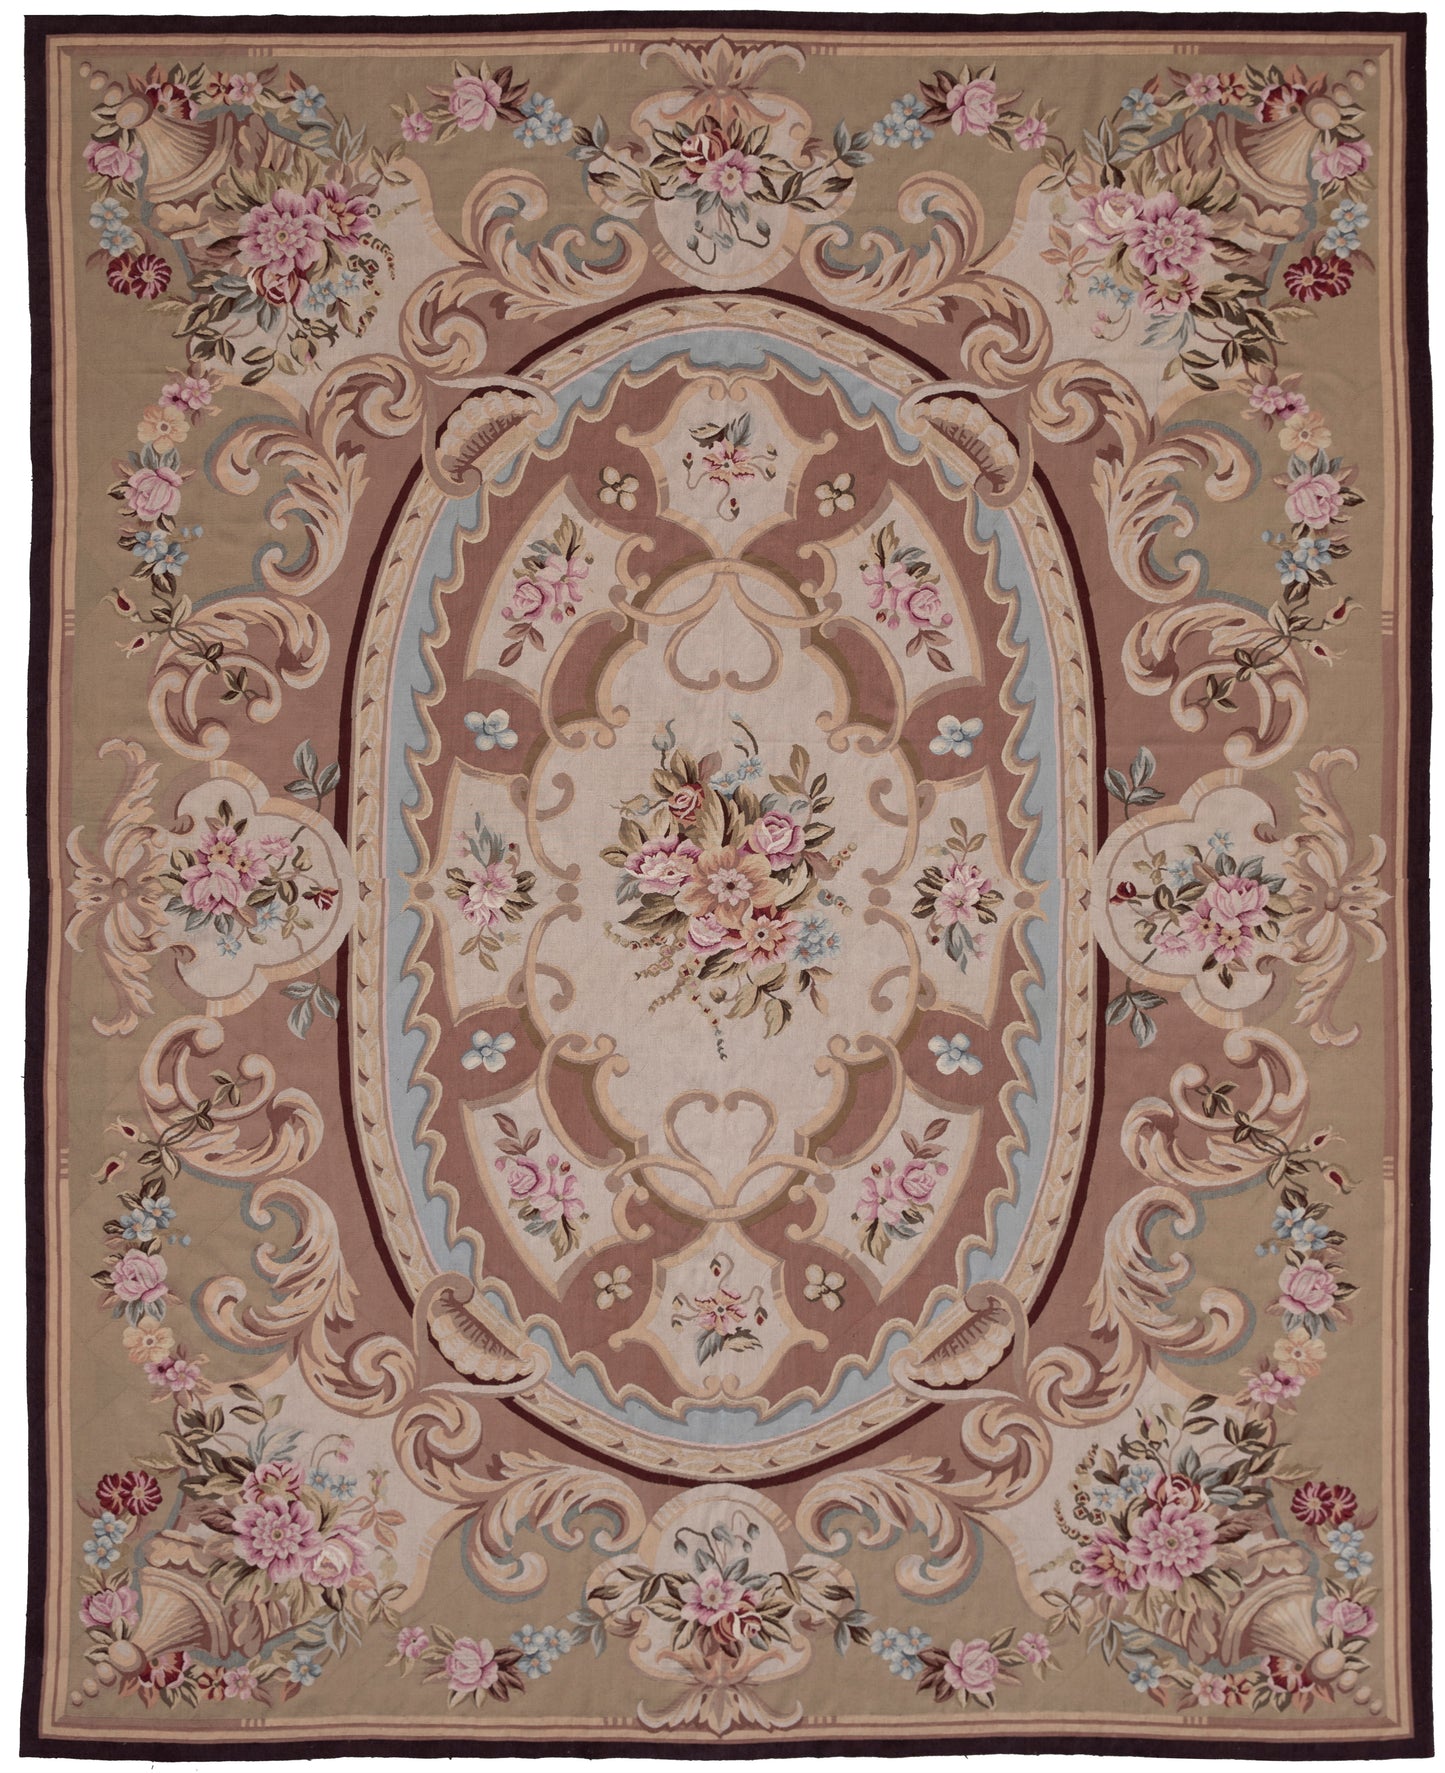 10' x 14' Tan Blue and Pink French Aubusson Design Area Rug